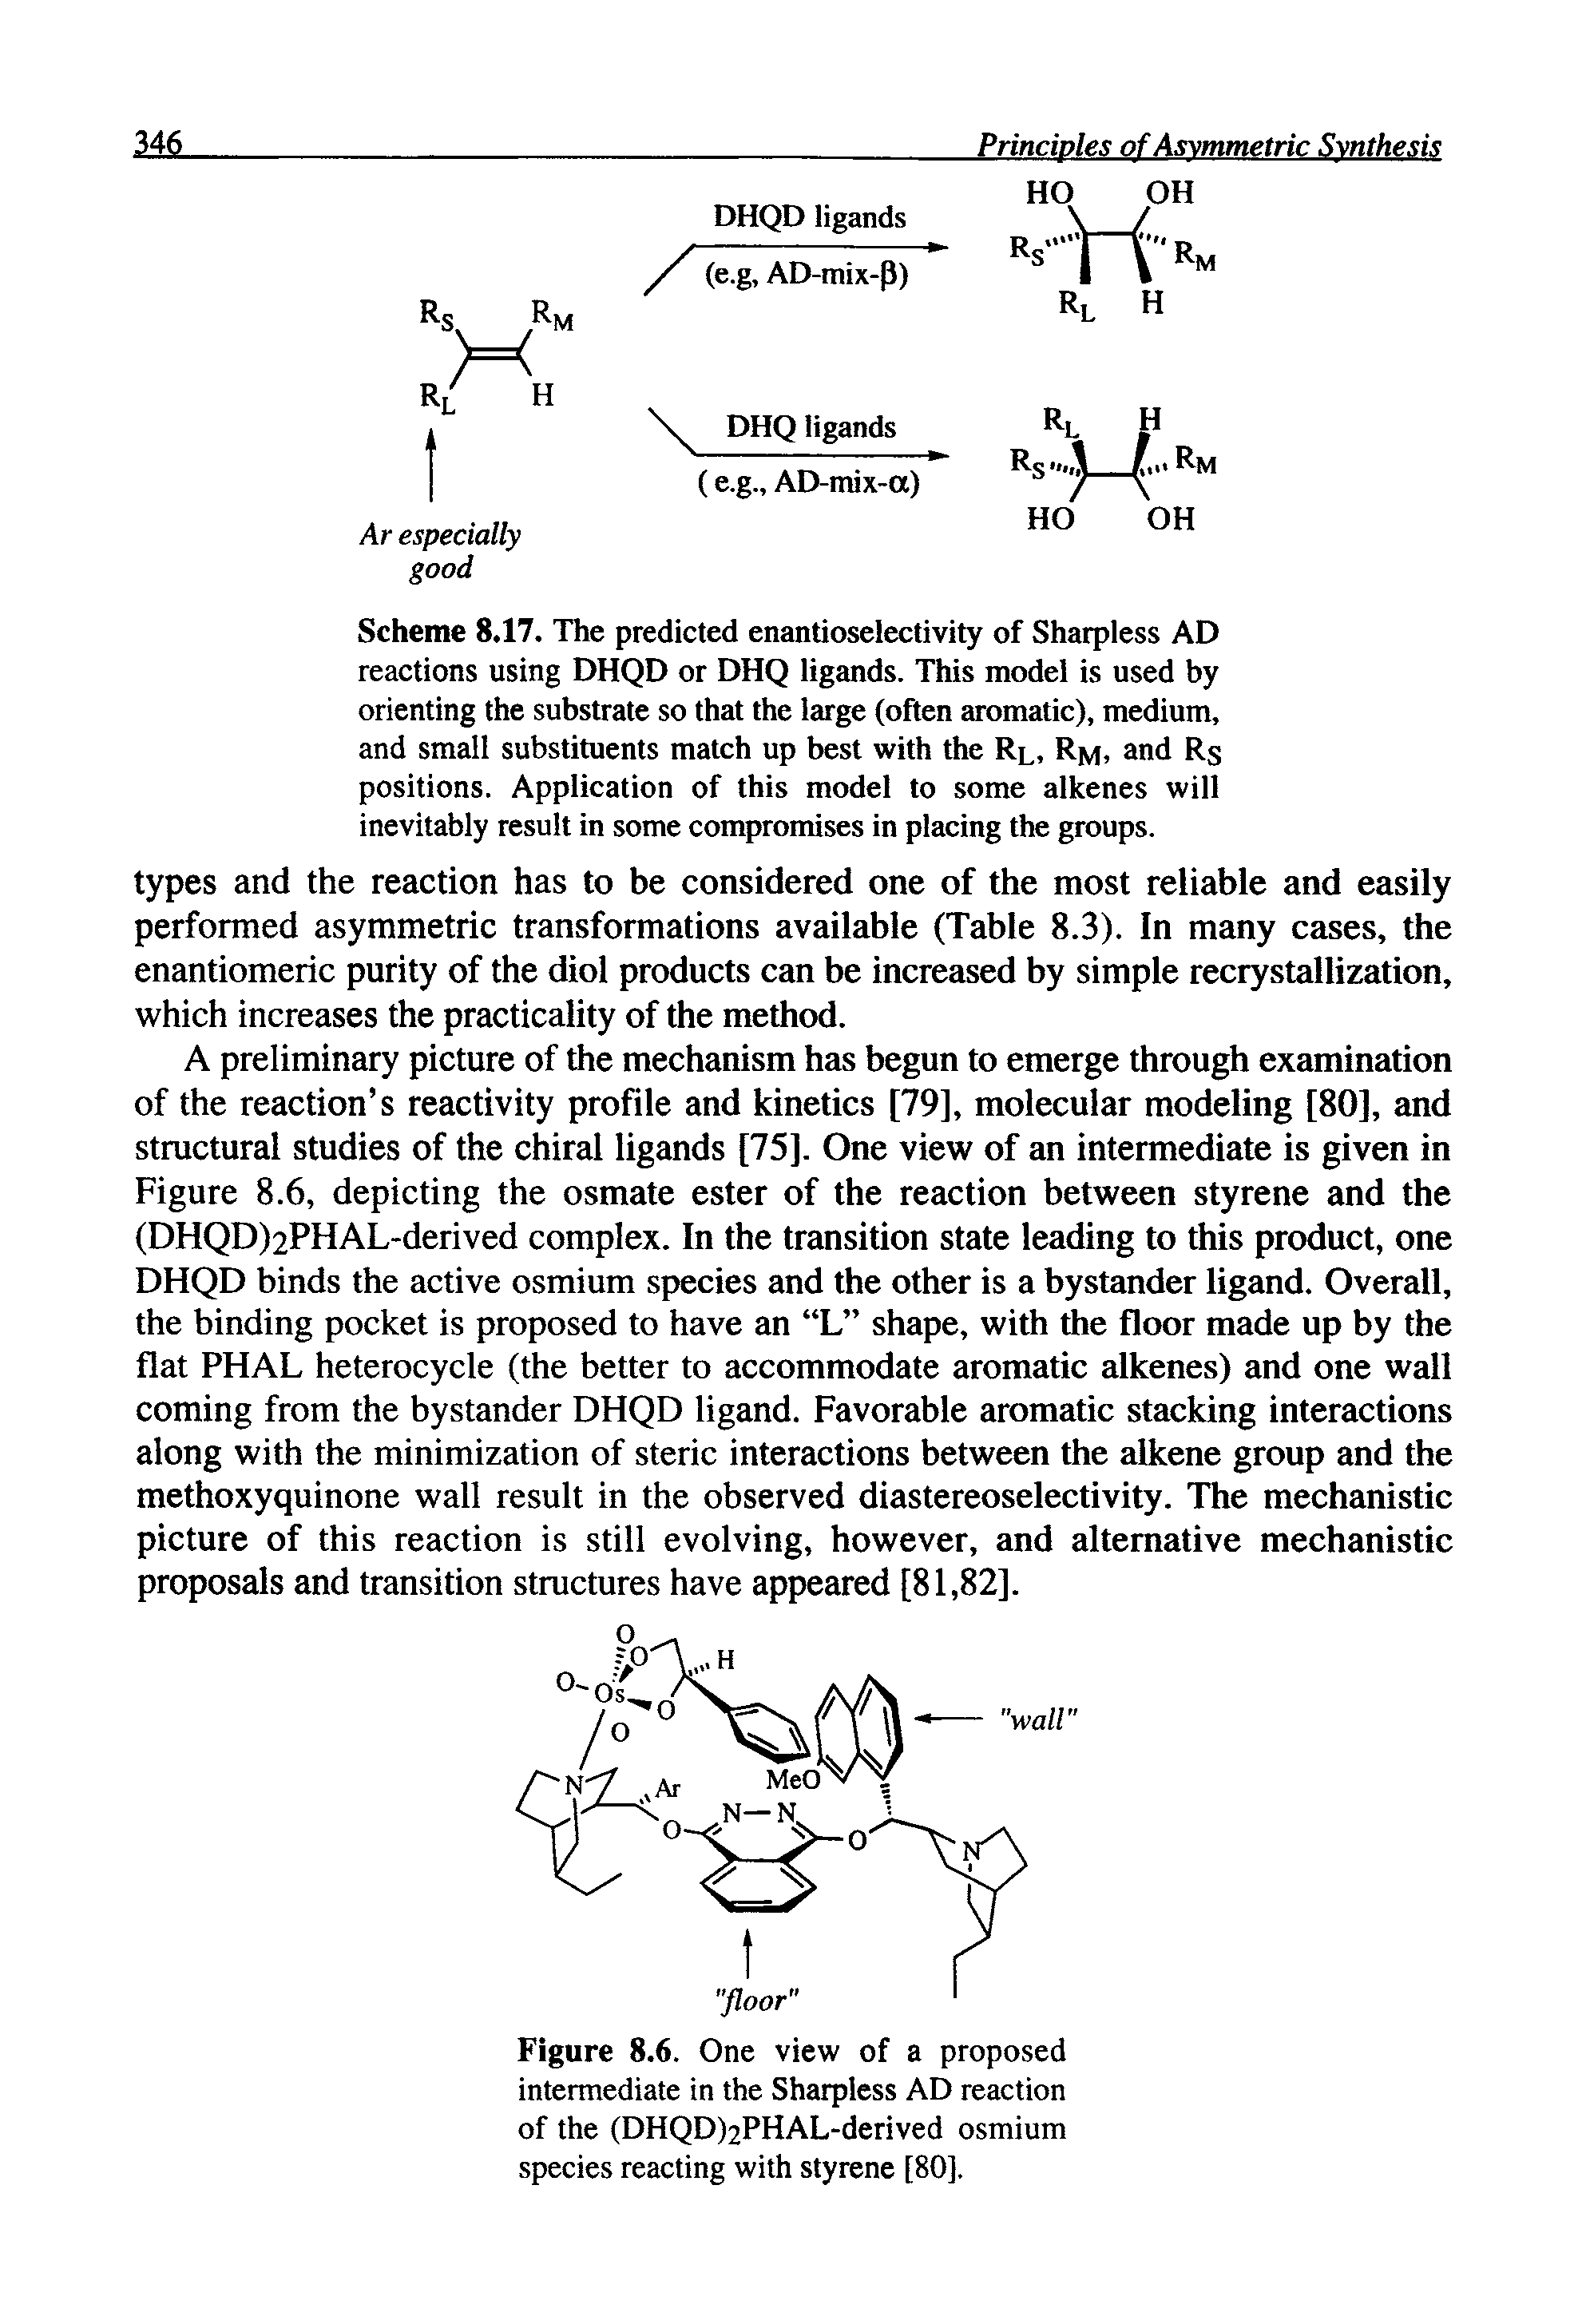 Scheme 8.17. The predicted enantioselectivity of Sharpless AD reactions using DHQD or DHQ ligands. This model is used by orienting the substrate so that the large (often aromatic), medium, and small substituents match up best with the Rl, Rm. Rs positions. Application of this model to some alkenes will inevitably result in some compromises in placing the groups.